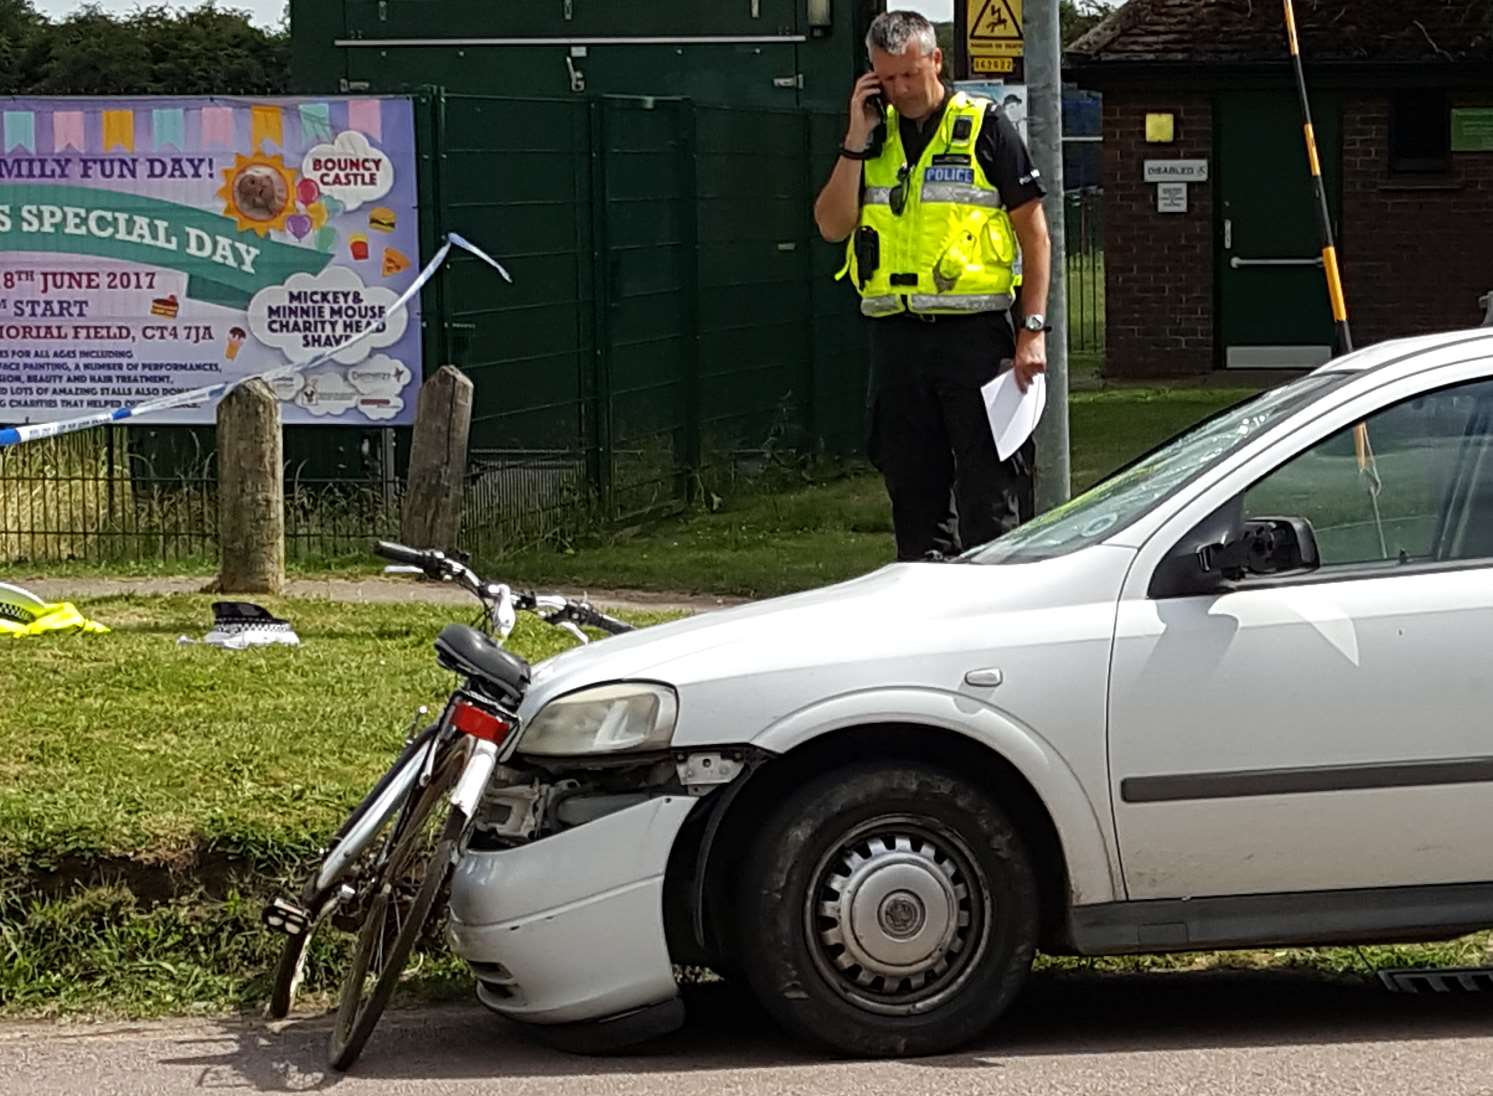 The cyclist and van collided in Station Road, Chartham